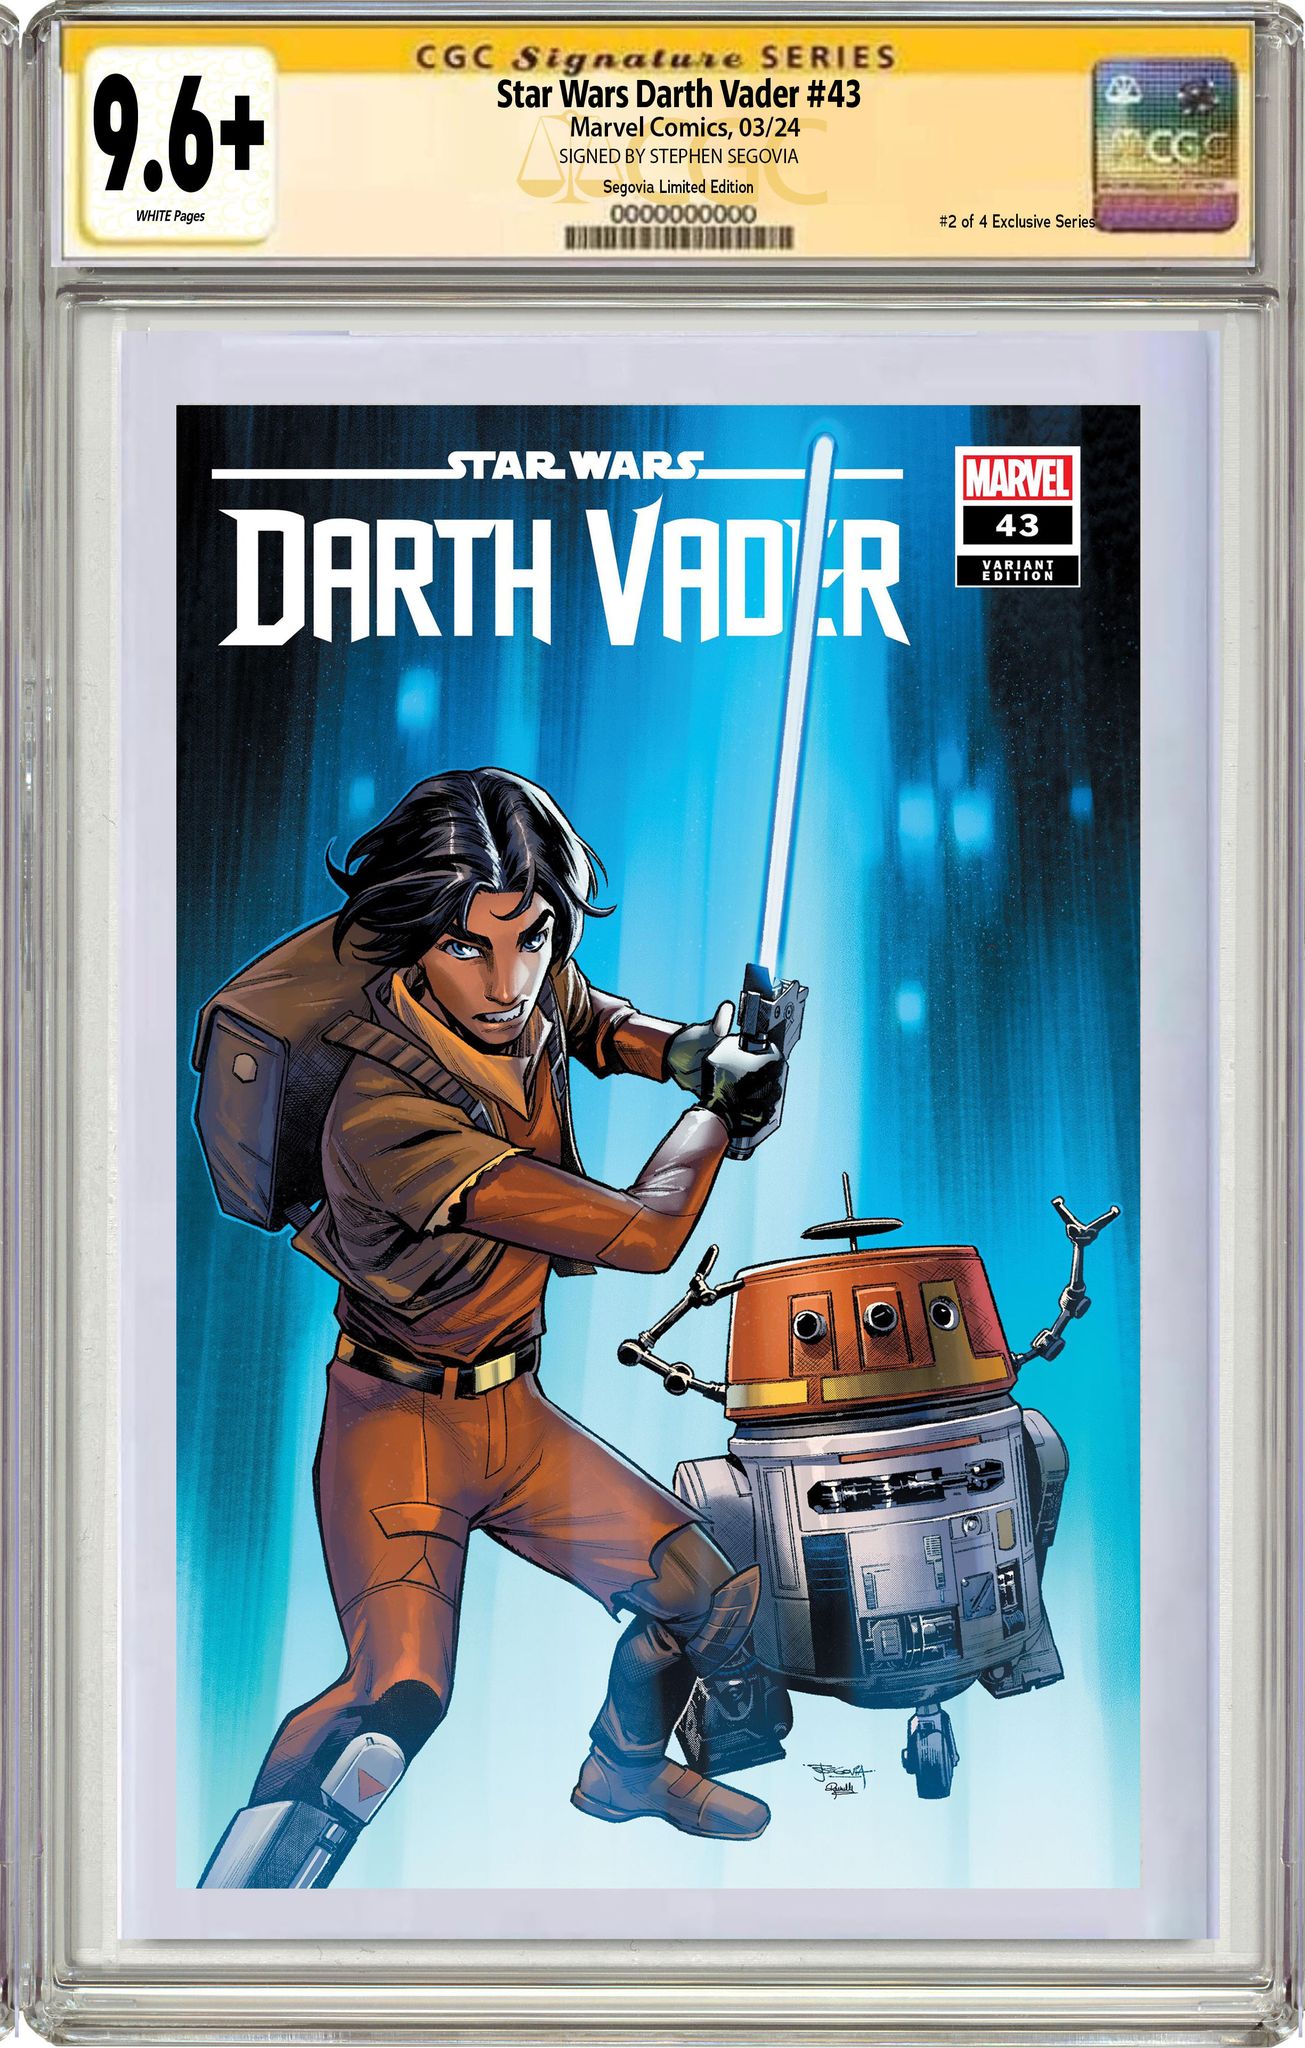 STAR WARS: DARTH VADER 43 STEPHEN SEGOVIA REBELS 10TH ANNIVERSARY LIMITED EDITION #2 OF 4 EXCLUSIVE SERIES OPTIONS - 02/14/24